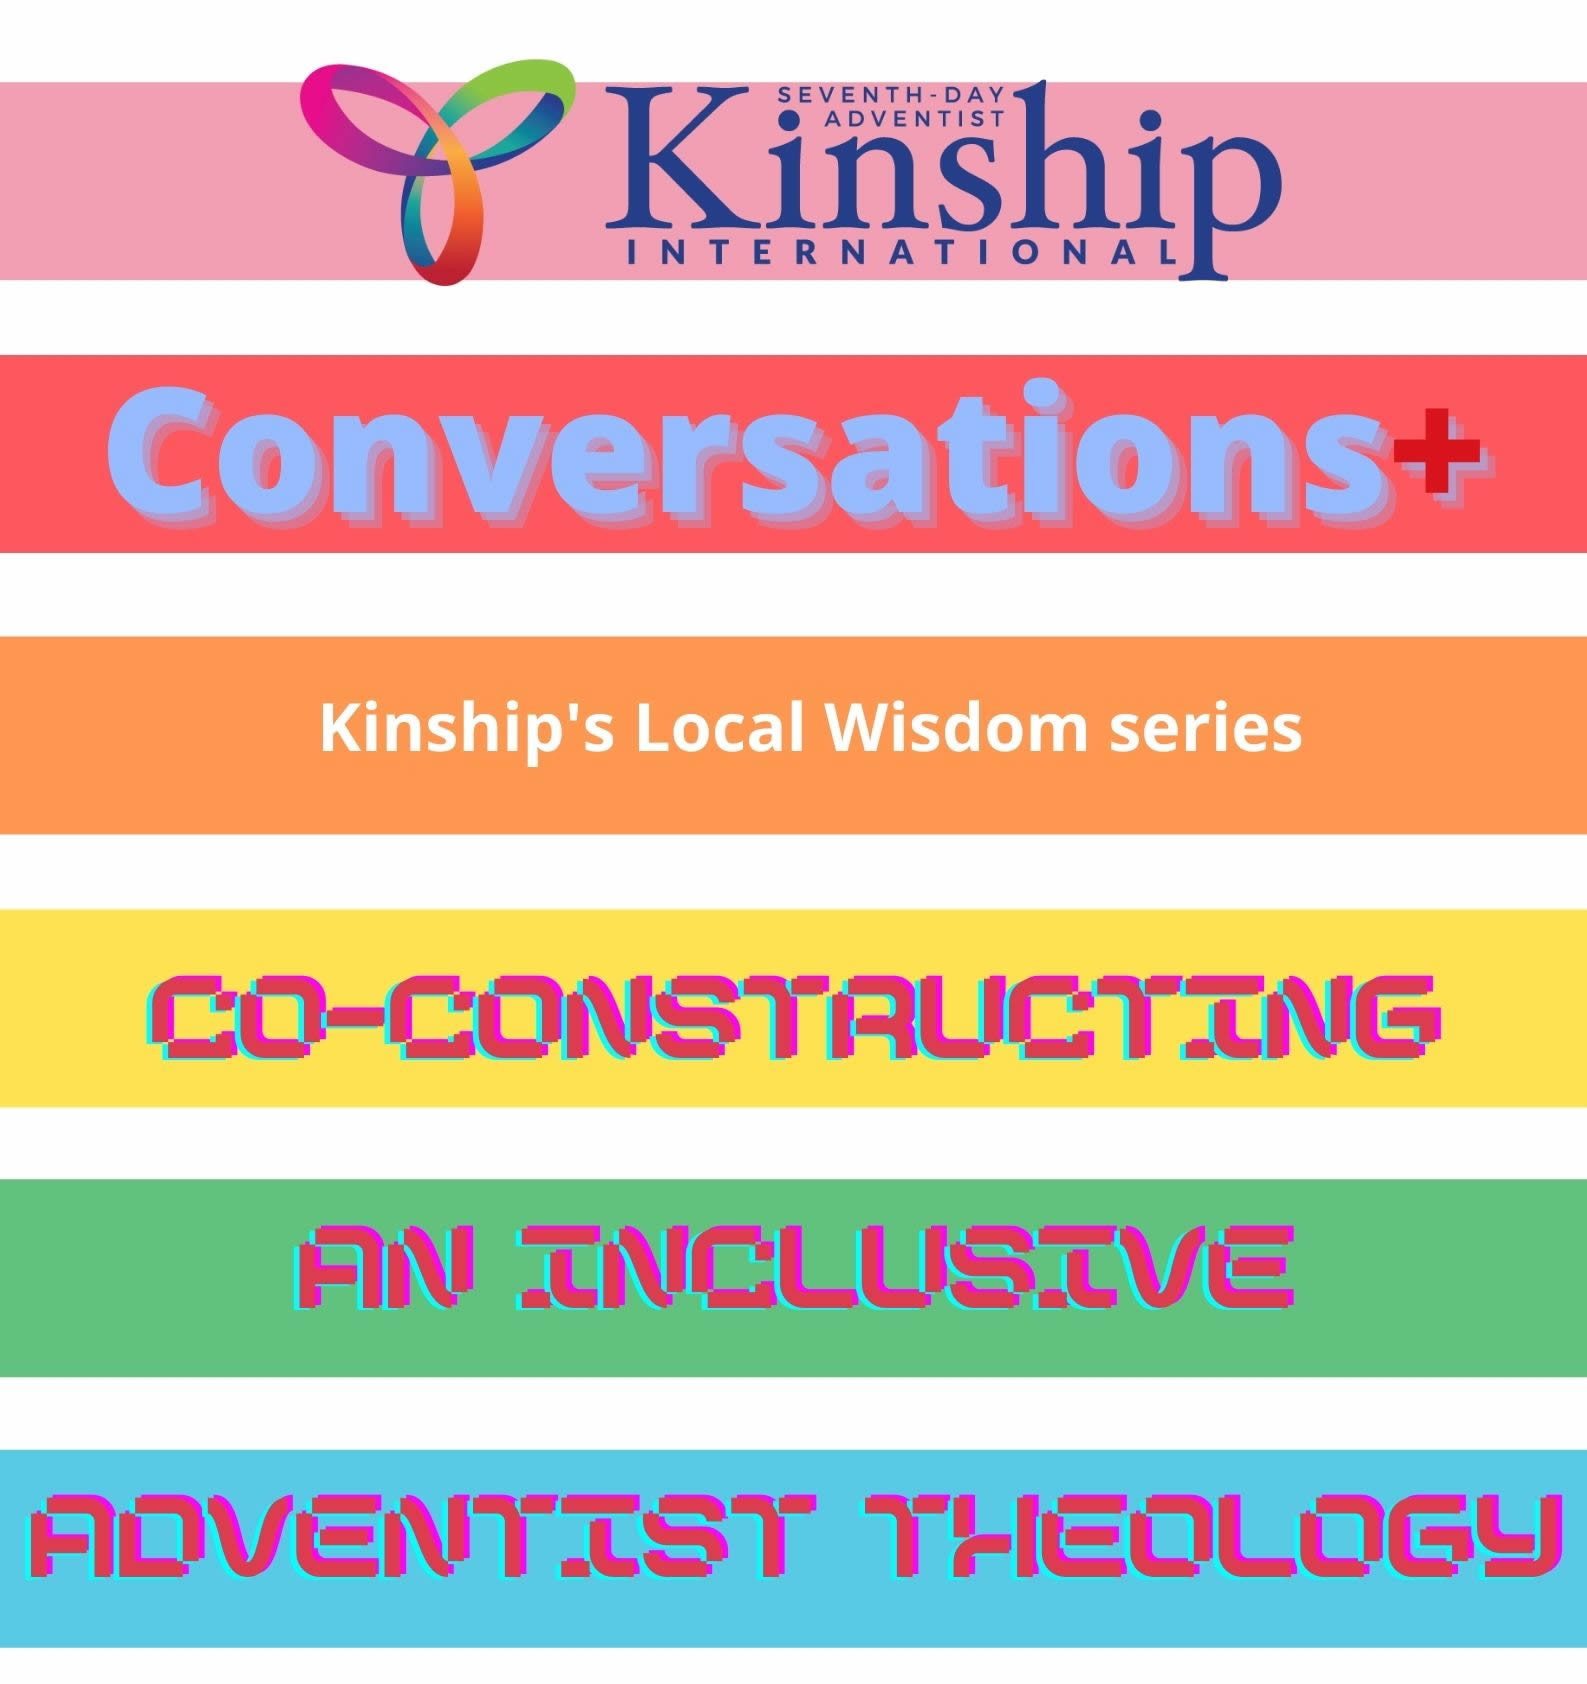 Co Constructing an Inclusive Adventist theOLOGY 003